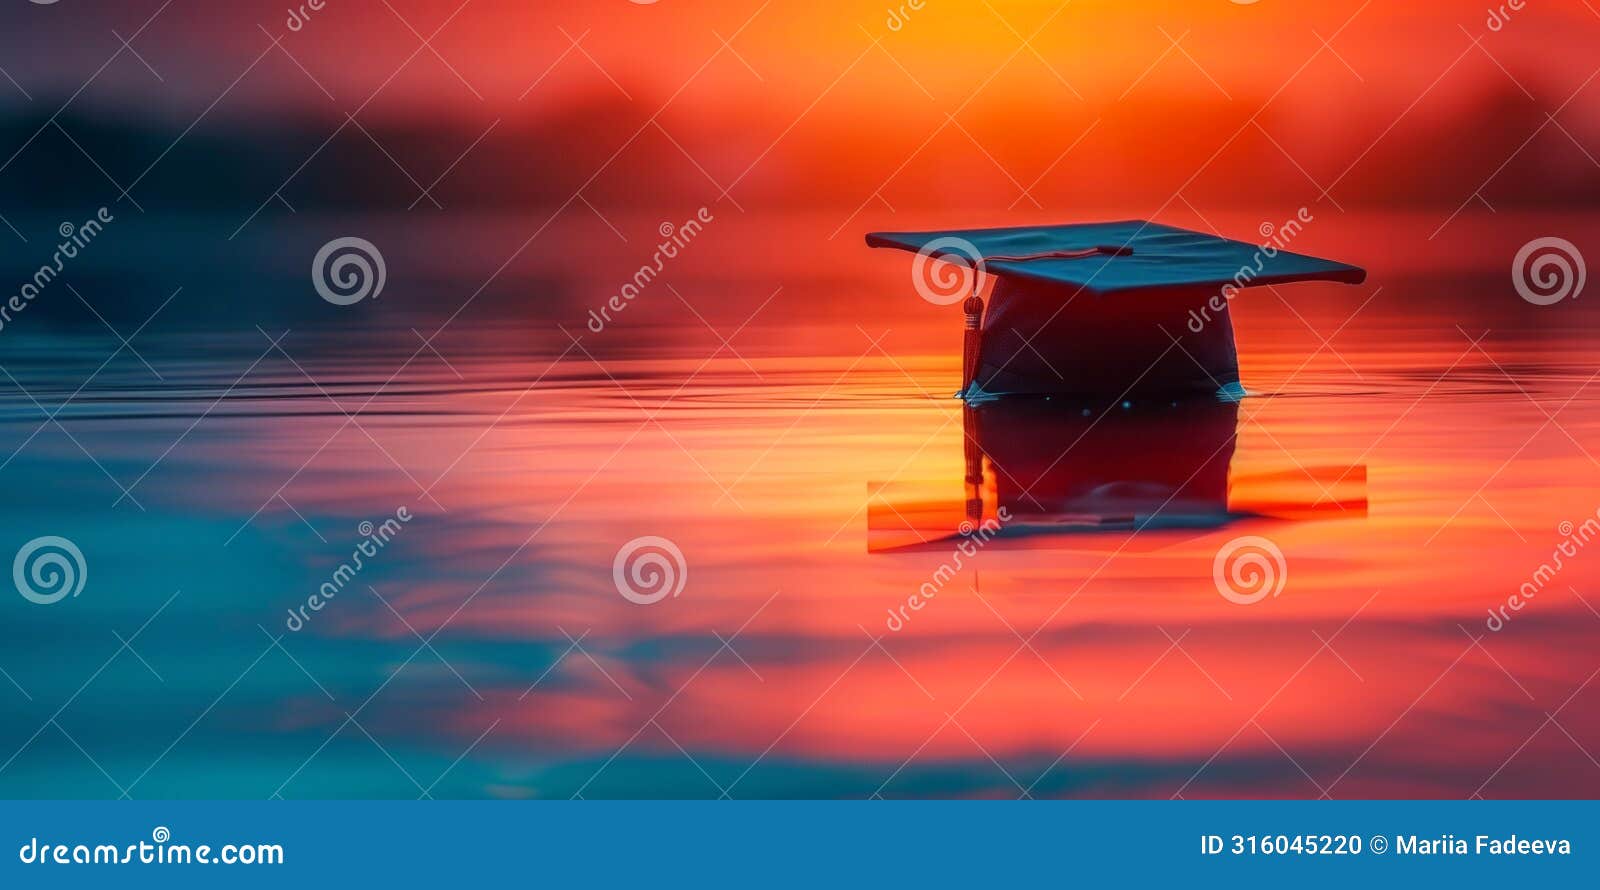 graduation cap floating on water at sunset, concept for educational dreams. graduation time in educational institutions.